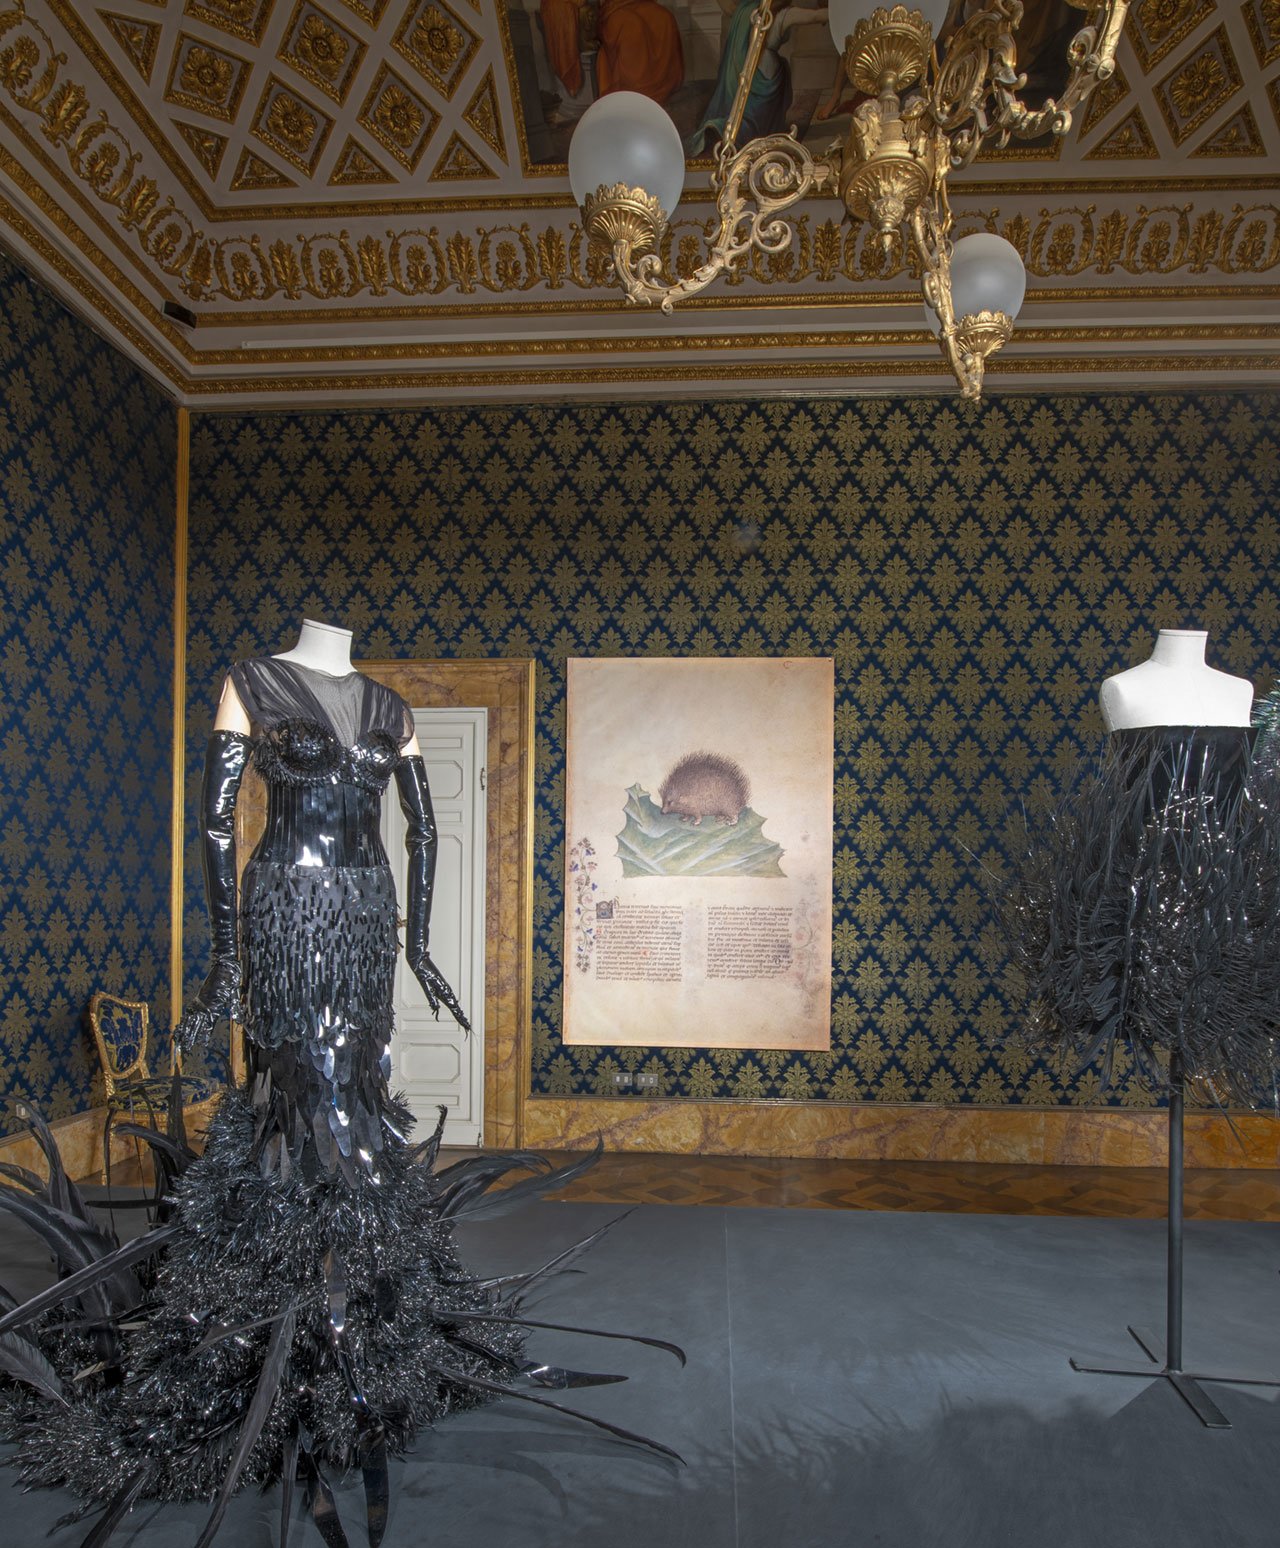 Exhibition view (from left to right):
On Aura Tout Vu, Dress“Jet lag”, Spring/Summer 2016 Couture.
Iris van Herpen, Dress, Voltage Collection, Spring/Summer 2013 Couture.
Photo © Antonio Quattrone.